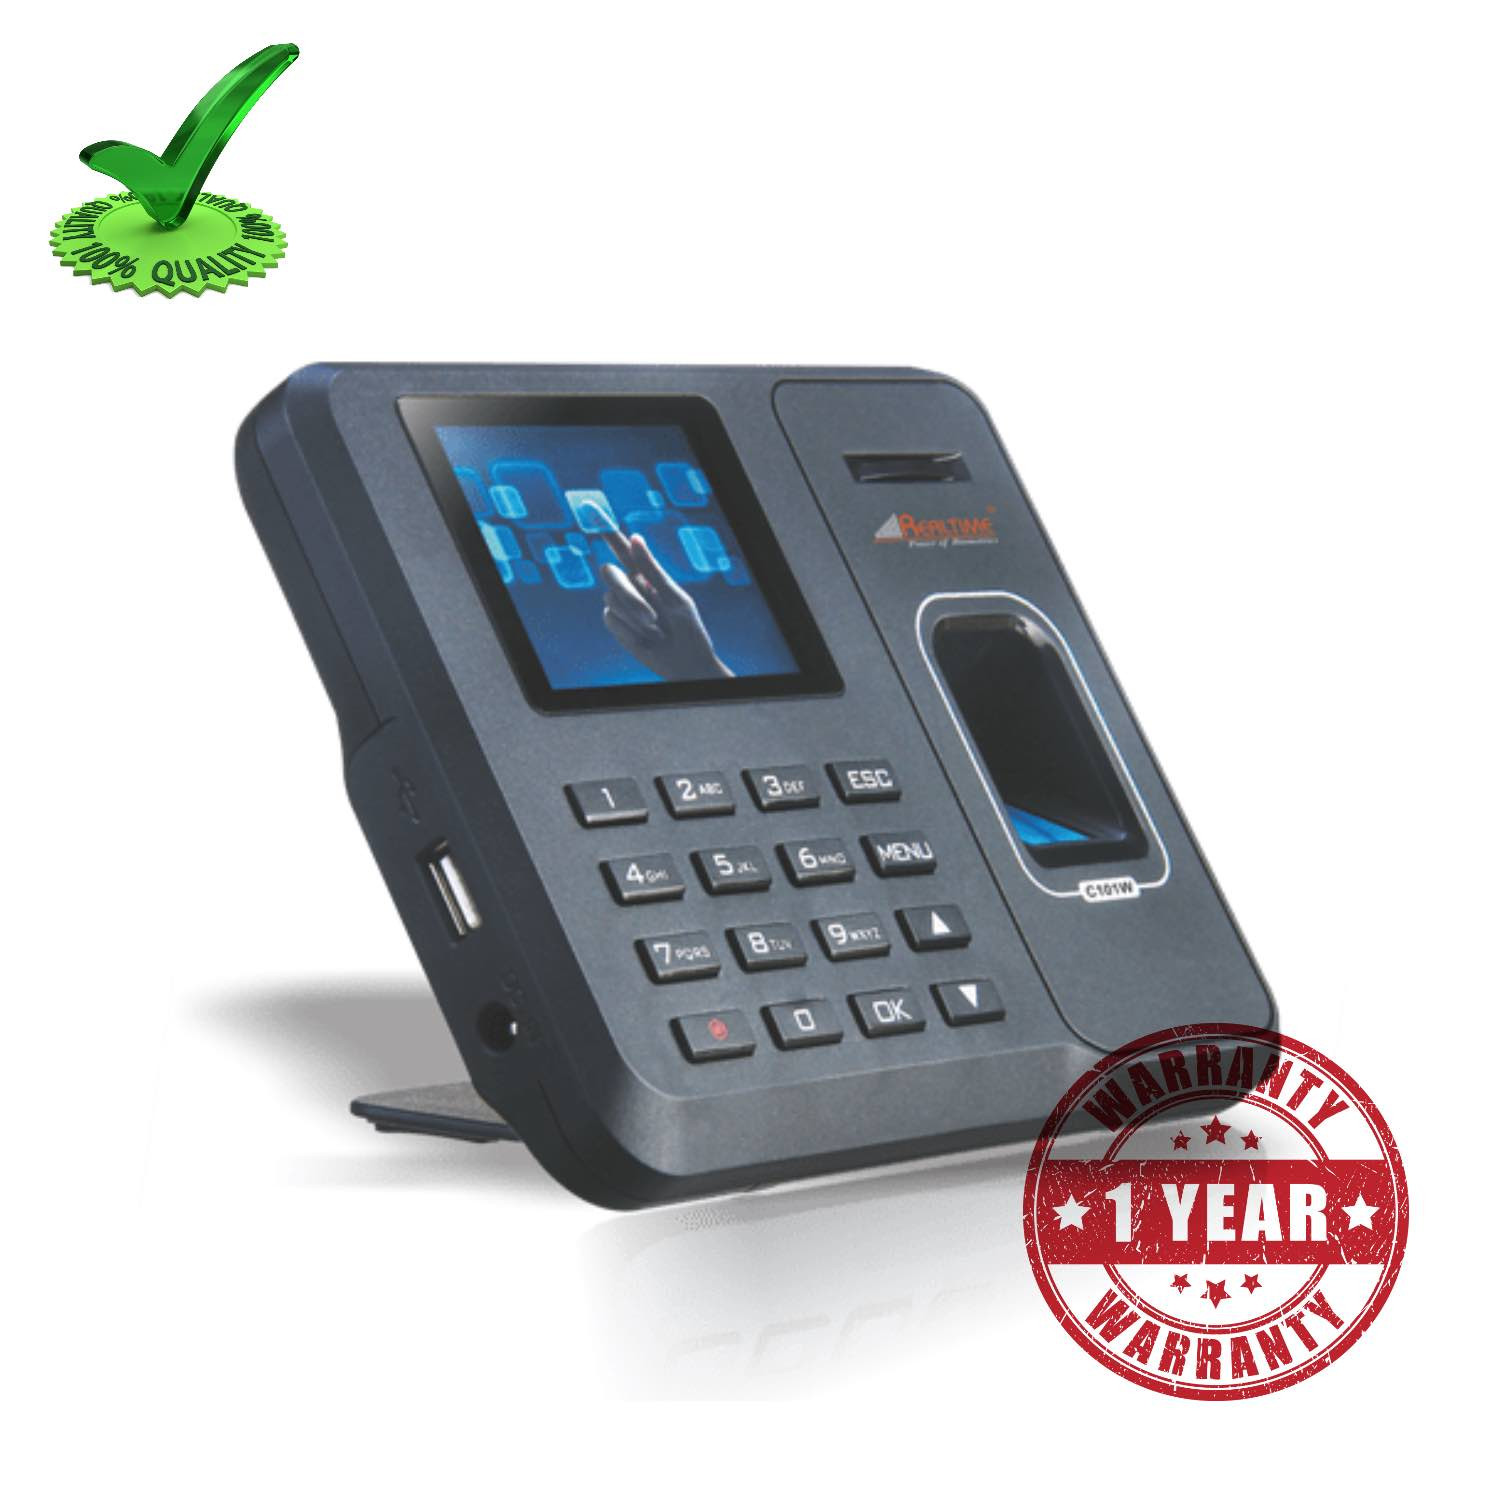 Realtime C101W Finger Print WiFi Time Attendance Systems